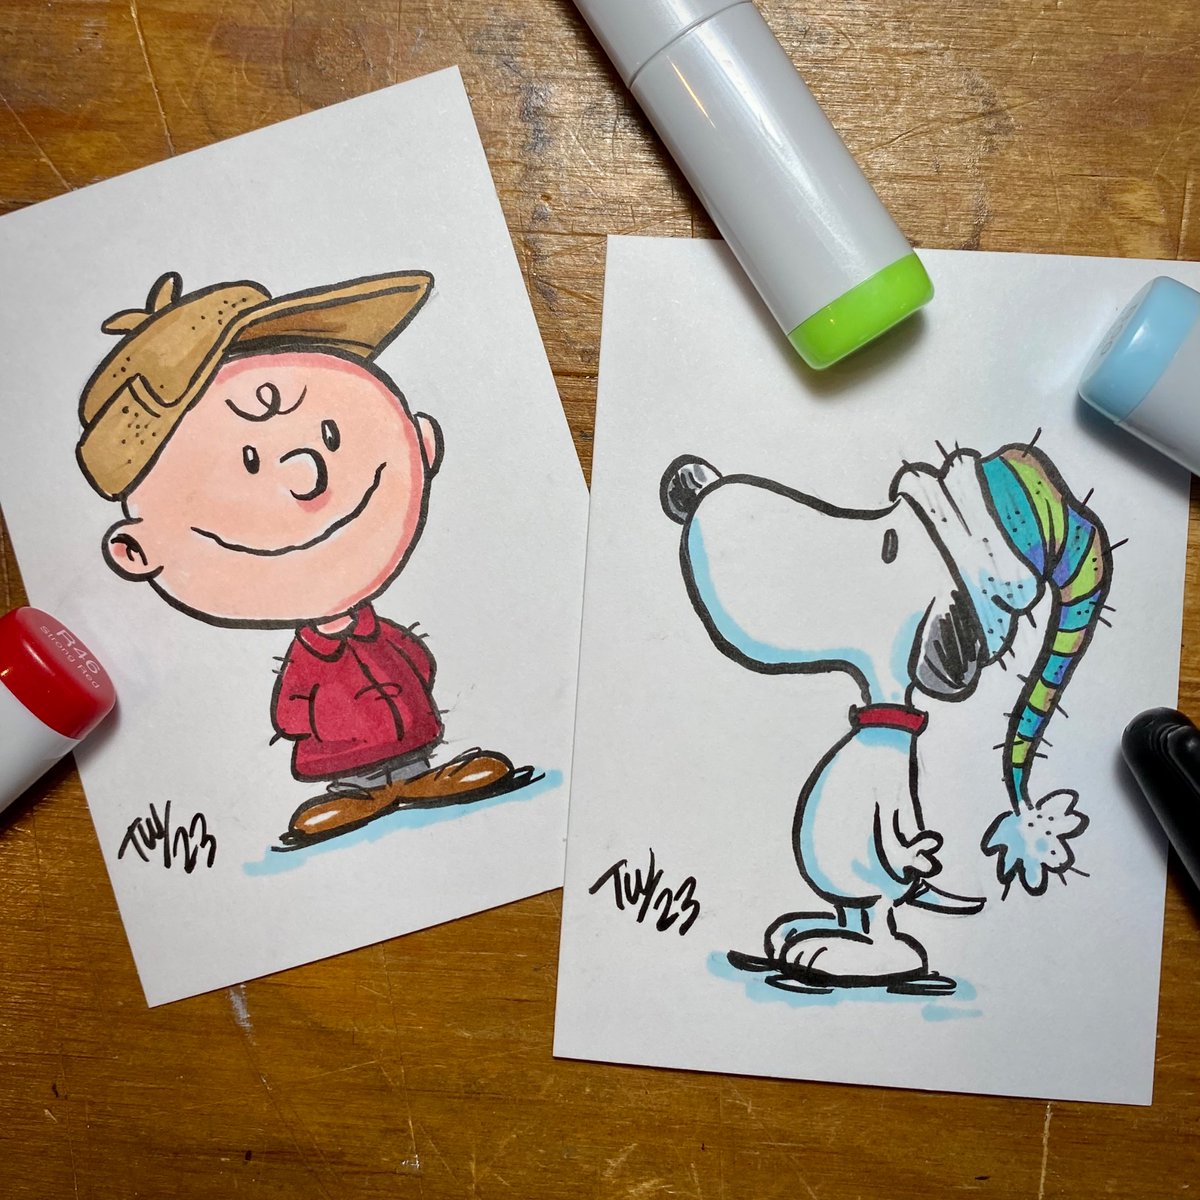 #charliebrown #snoopy
#charliebrownchristmas  #peanuts 
#artisttradingcards

#sketch #sketchoftheday #dailysketch #dailydoodle 
#holidays #christmas #charlesschulz #animation 
#snoopyfans #christmasclassics